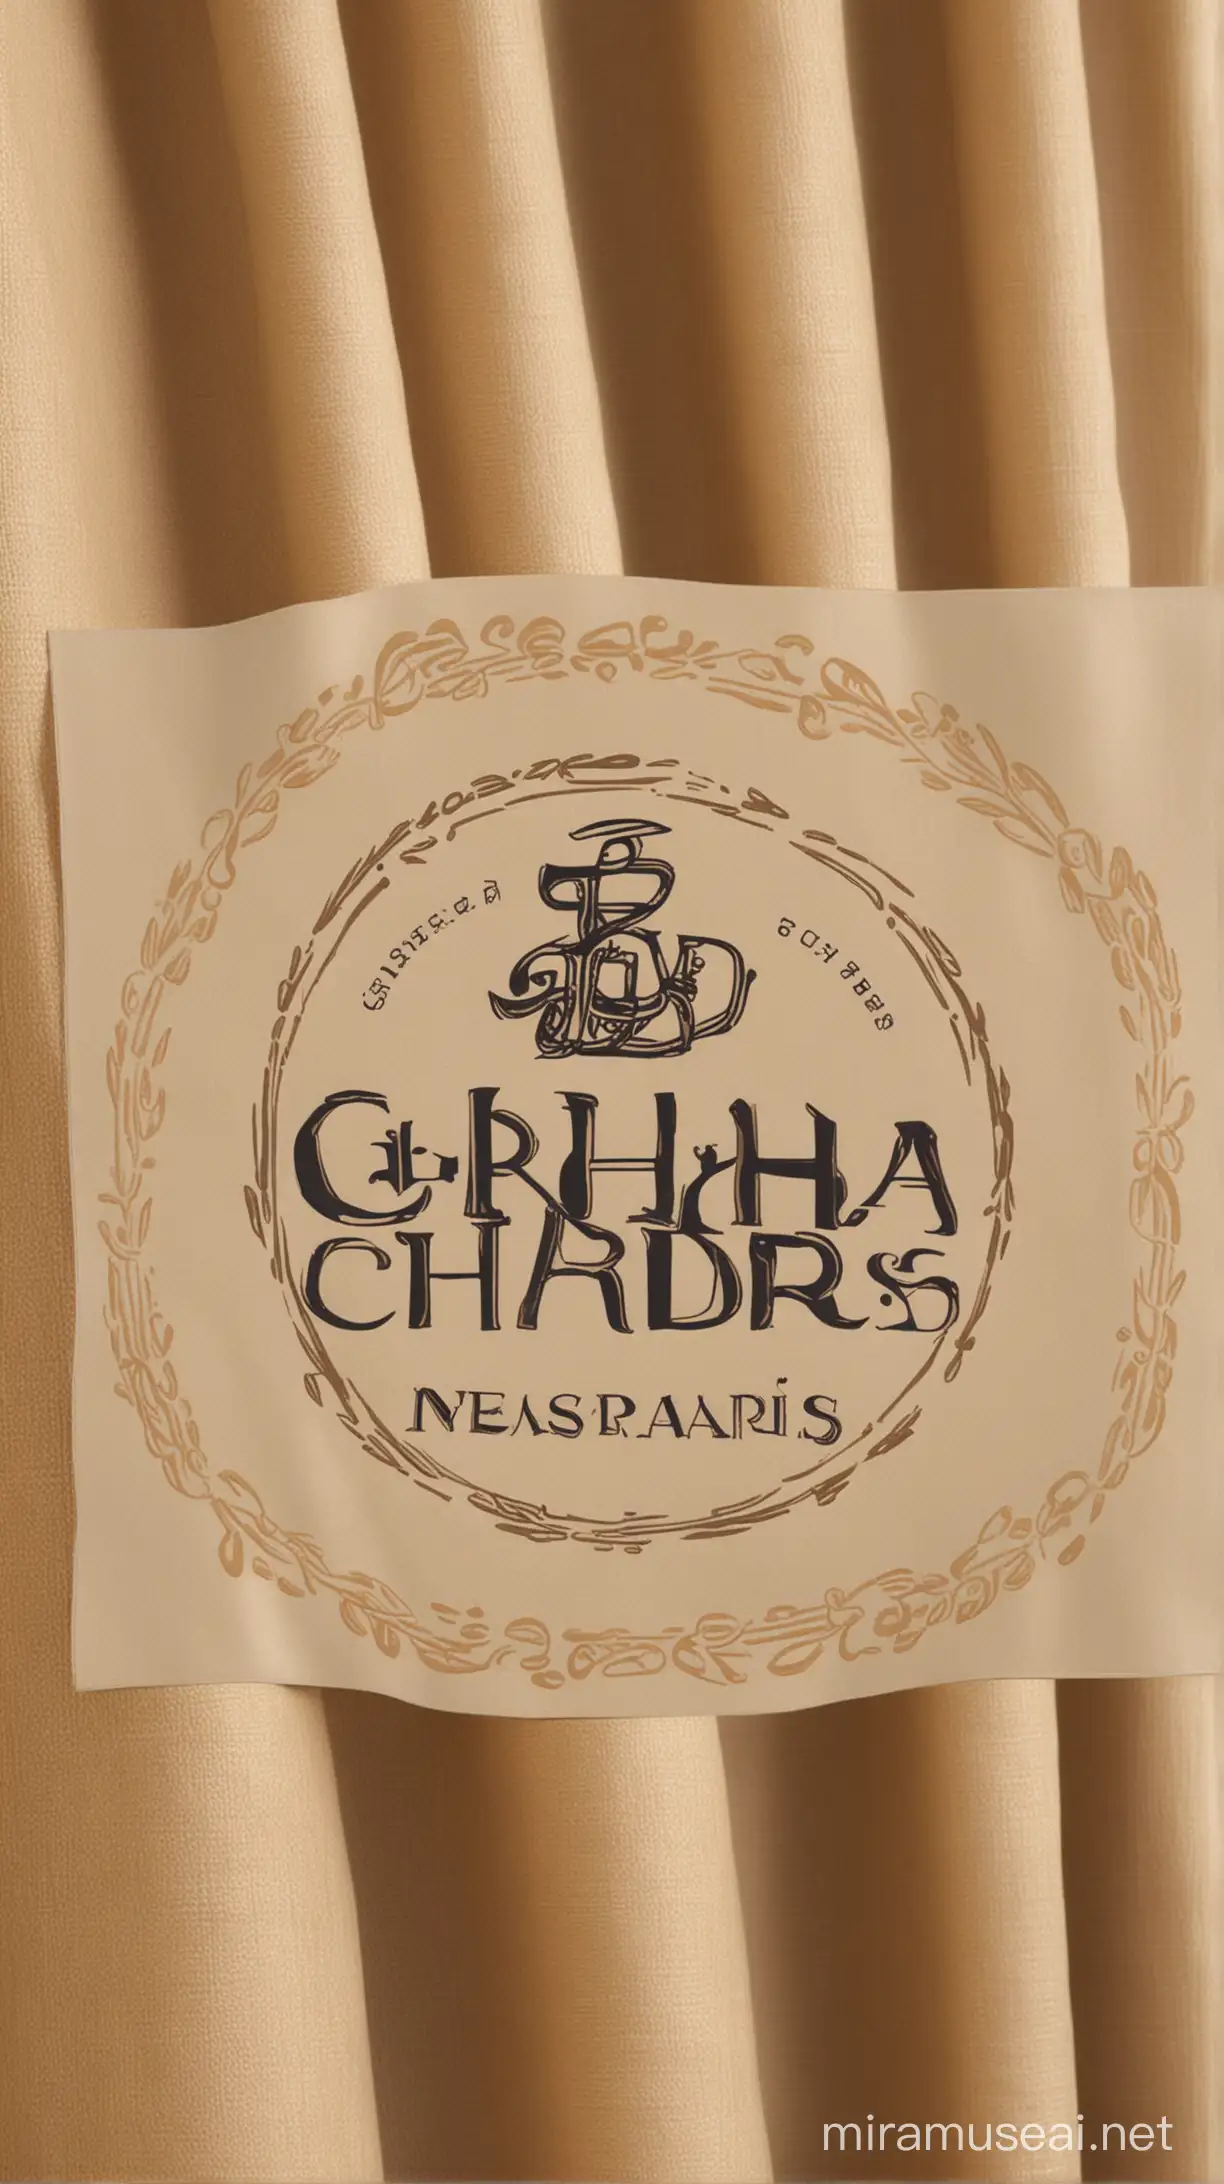 Design a logo featuring the text 'Gharra Traders' as the primary focus, with 'Curtains and Fleece' written beneath it in a smaller font. The design should convey elegance and reliability, suitable for a business specializing in high-quality home textiles. The logo should be simple, memorable, and easily recognizable, with a color palette that suggests luxury and comfort. Ensure all spellings are accurate and the overall presentation is professional and polished.